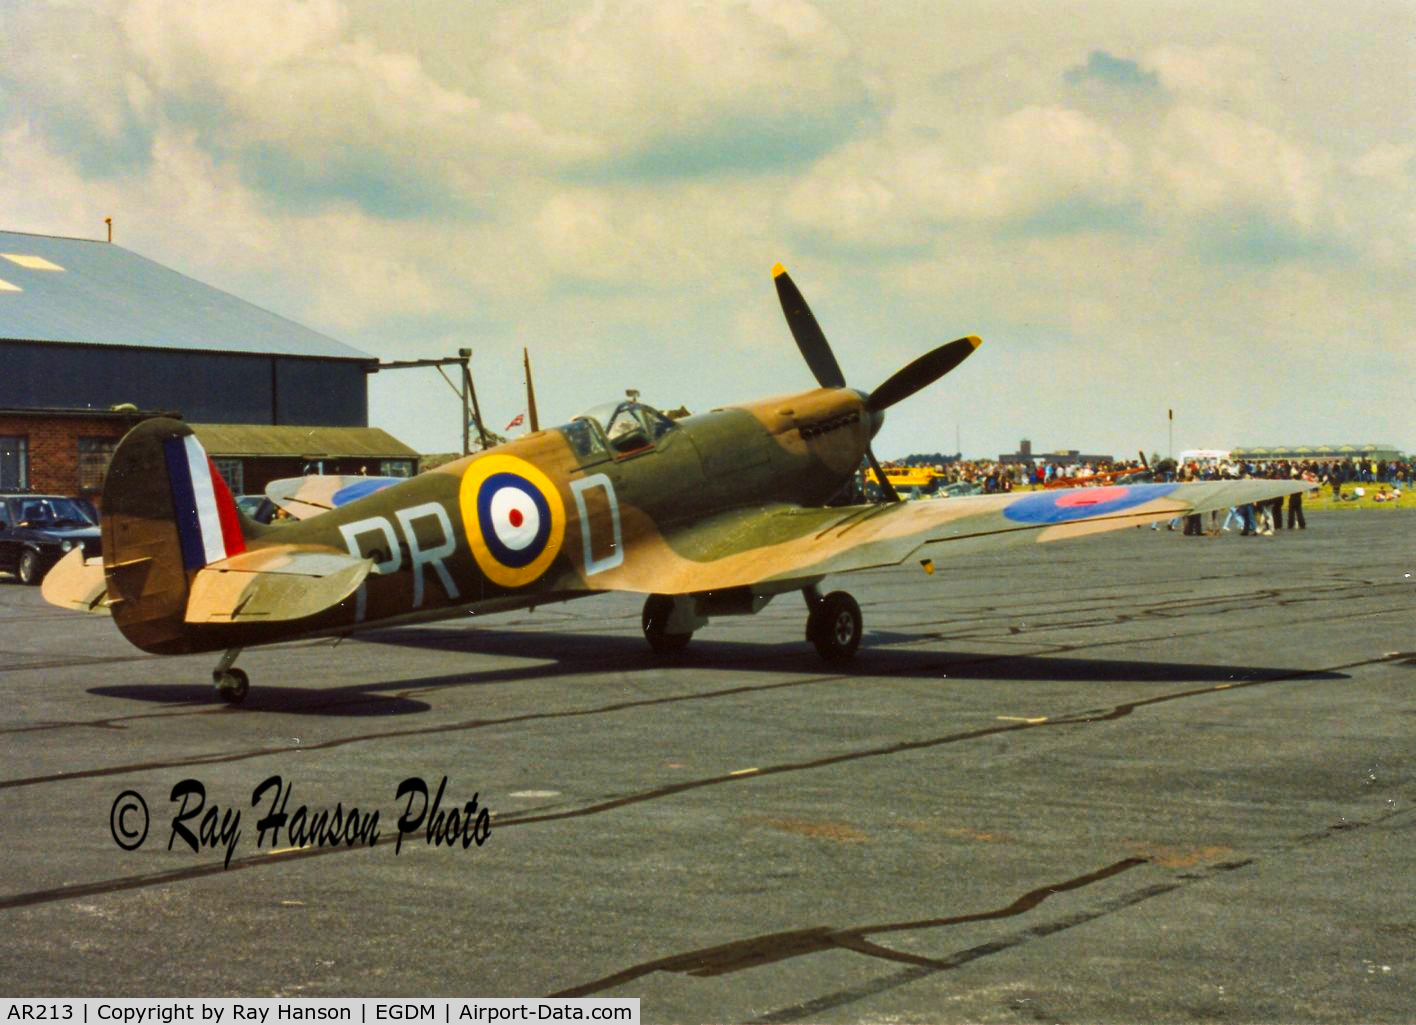 AR213, 1941 Supermarine 300 Spitfire Mk1A C/N WASP/20/2, Taken at the 50 Battle of Britain Airshow at Boscombe Down